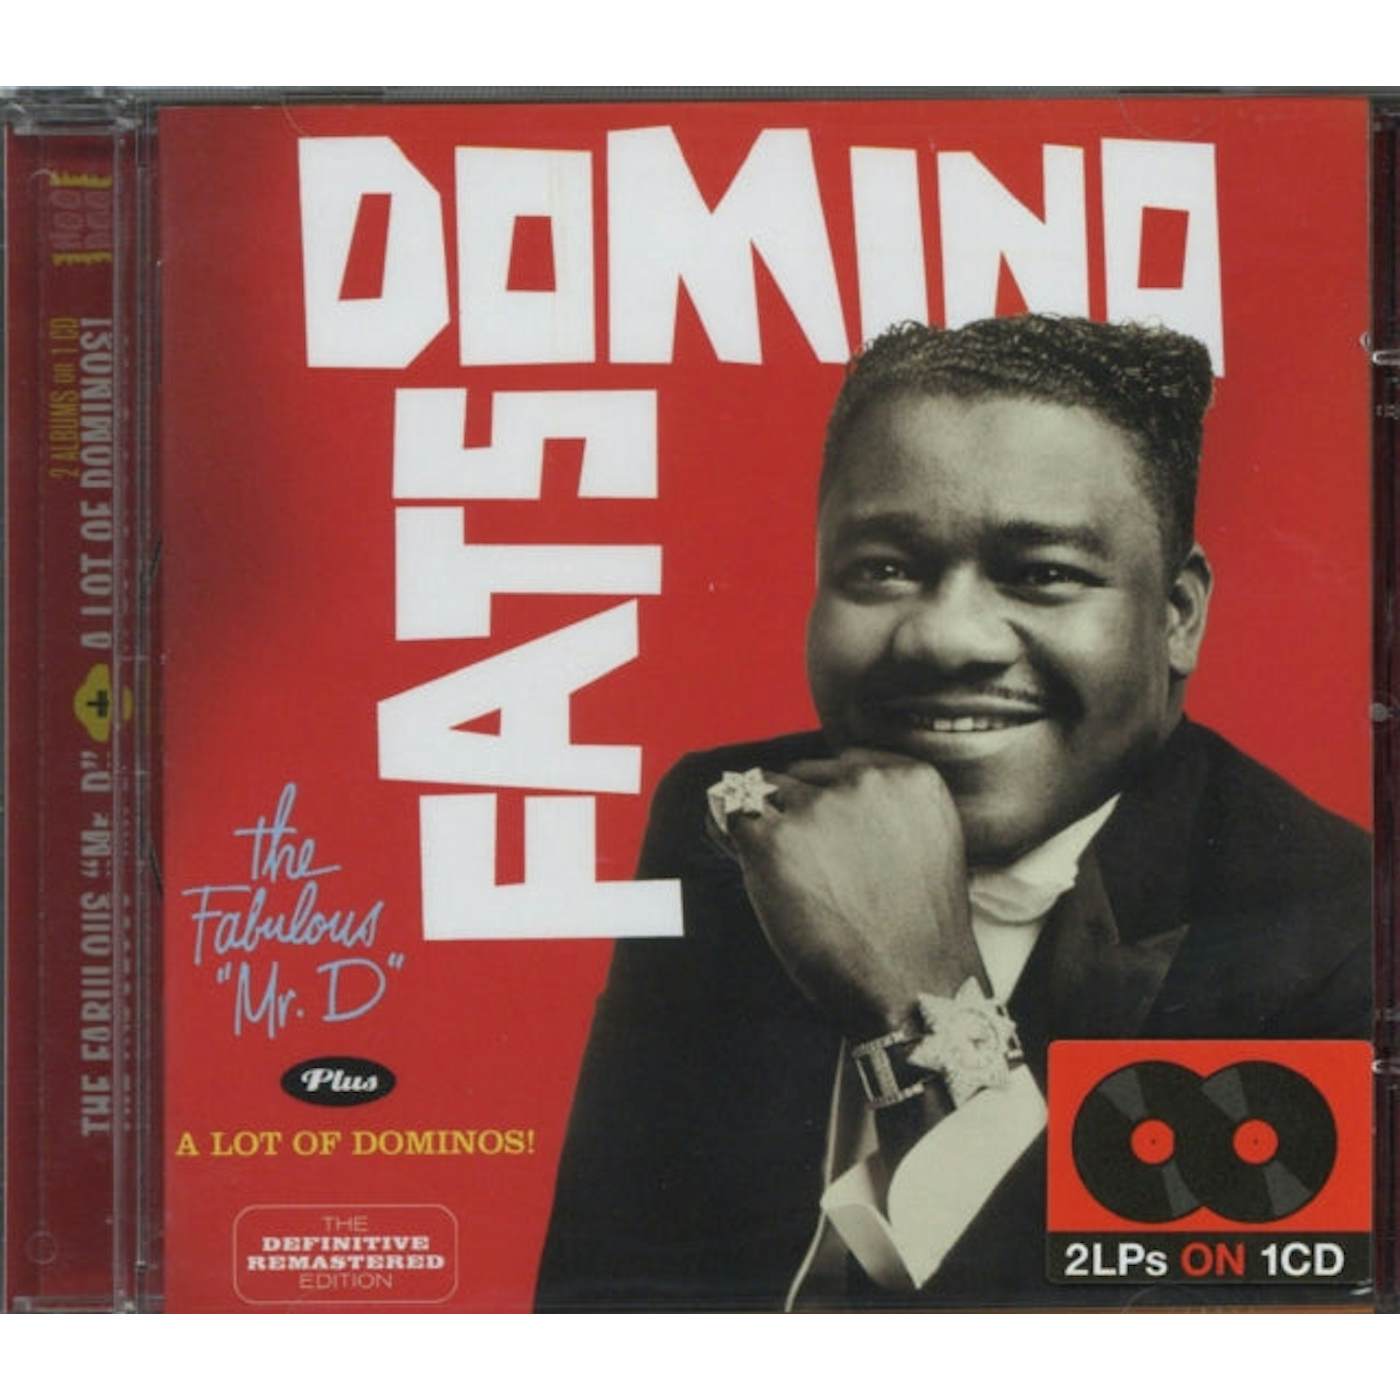 Fats Domino CD - The Fabulous 'Mr. D' / A Lot Of Dominos